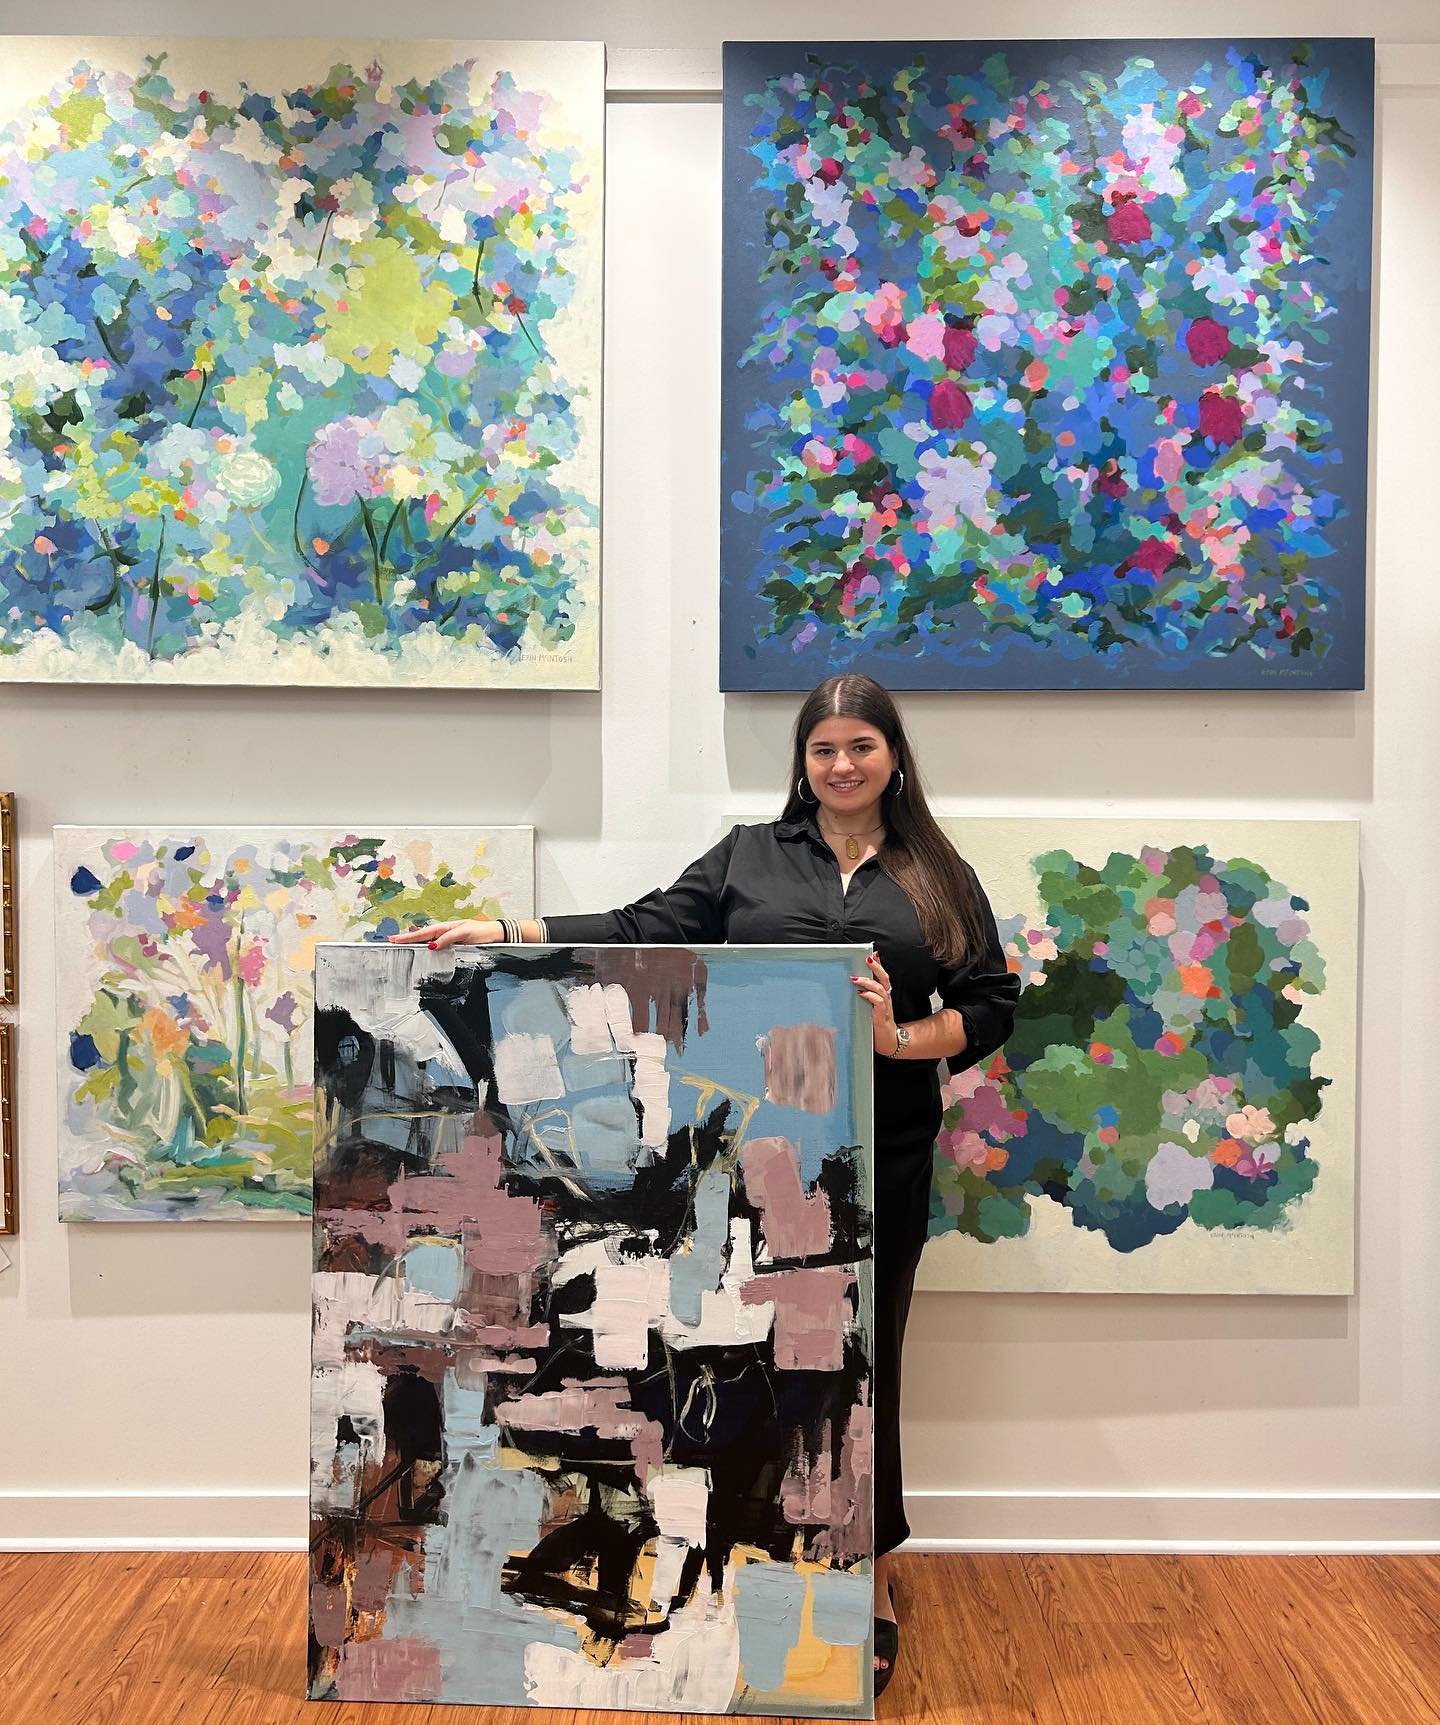 looking for a new painting? check out these new works of art from @toni_swarthoutart and @erinlmcintosh 
.
.
.
#greggirbygallery #coloryourworld#atlantaartgallery #contemporaryart #toniswarthout #erinmcintosh #abstractart